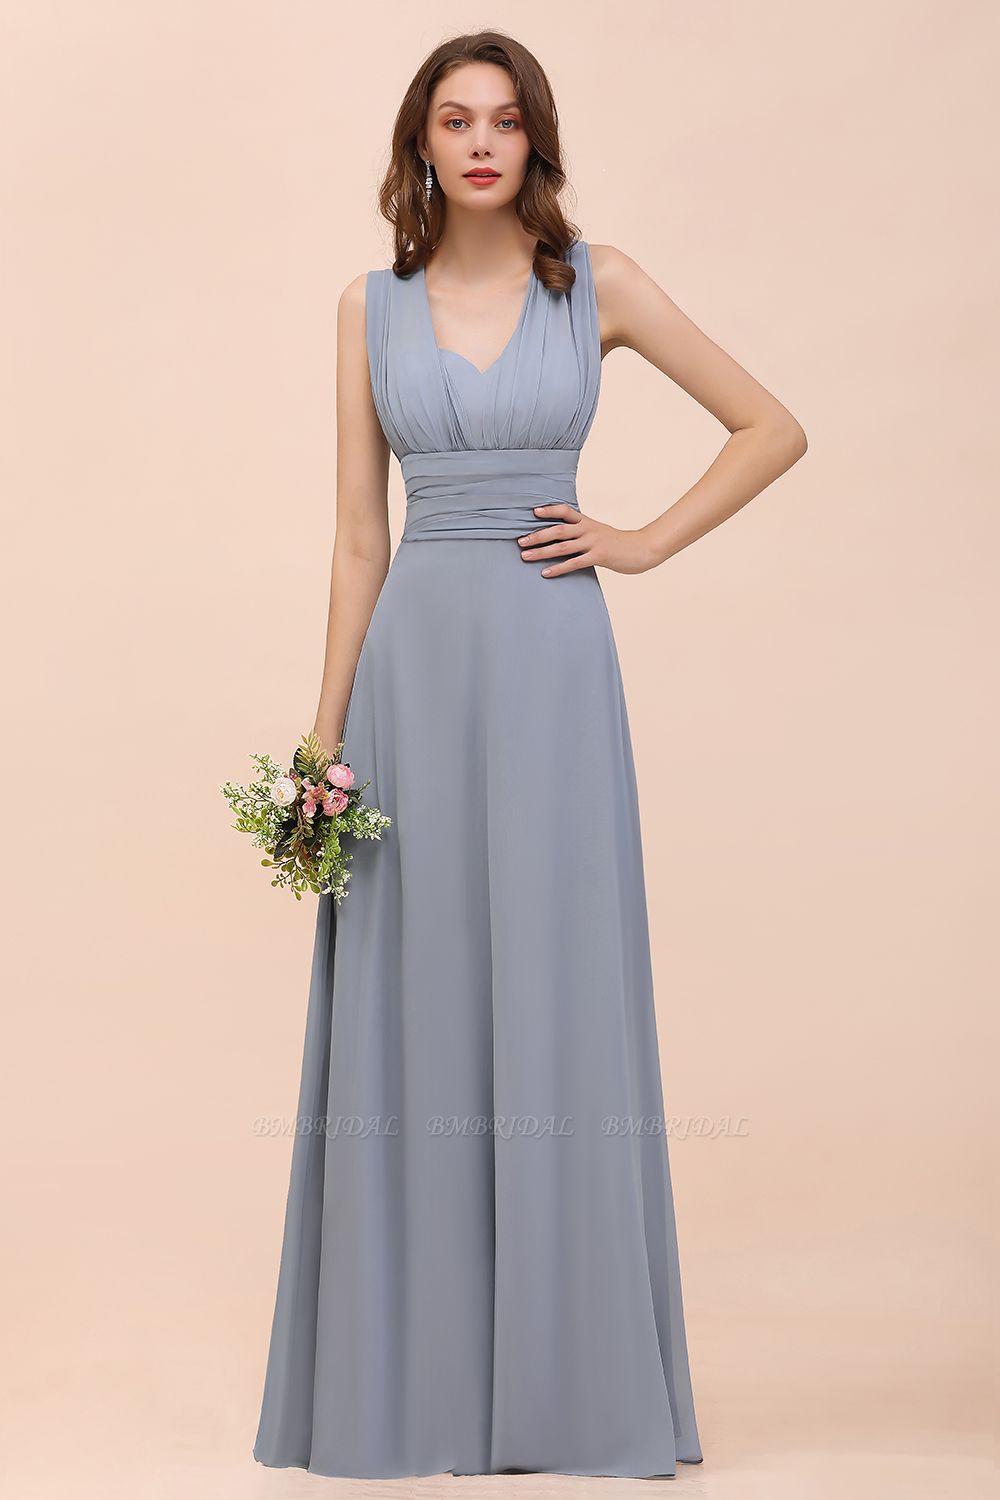 The Tips For Shopping Bridesmaid Dresses Online